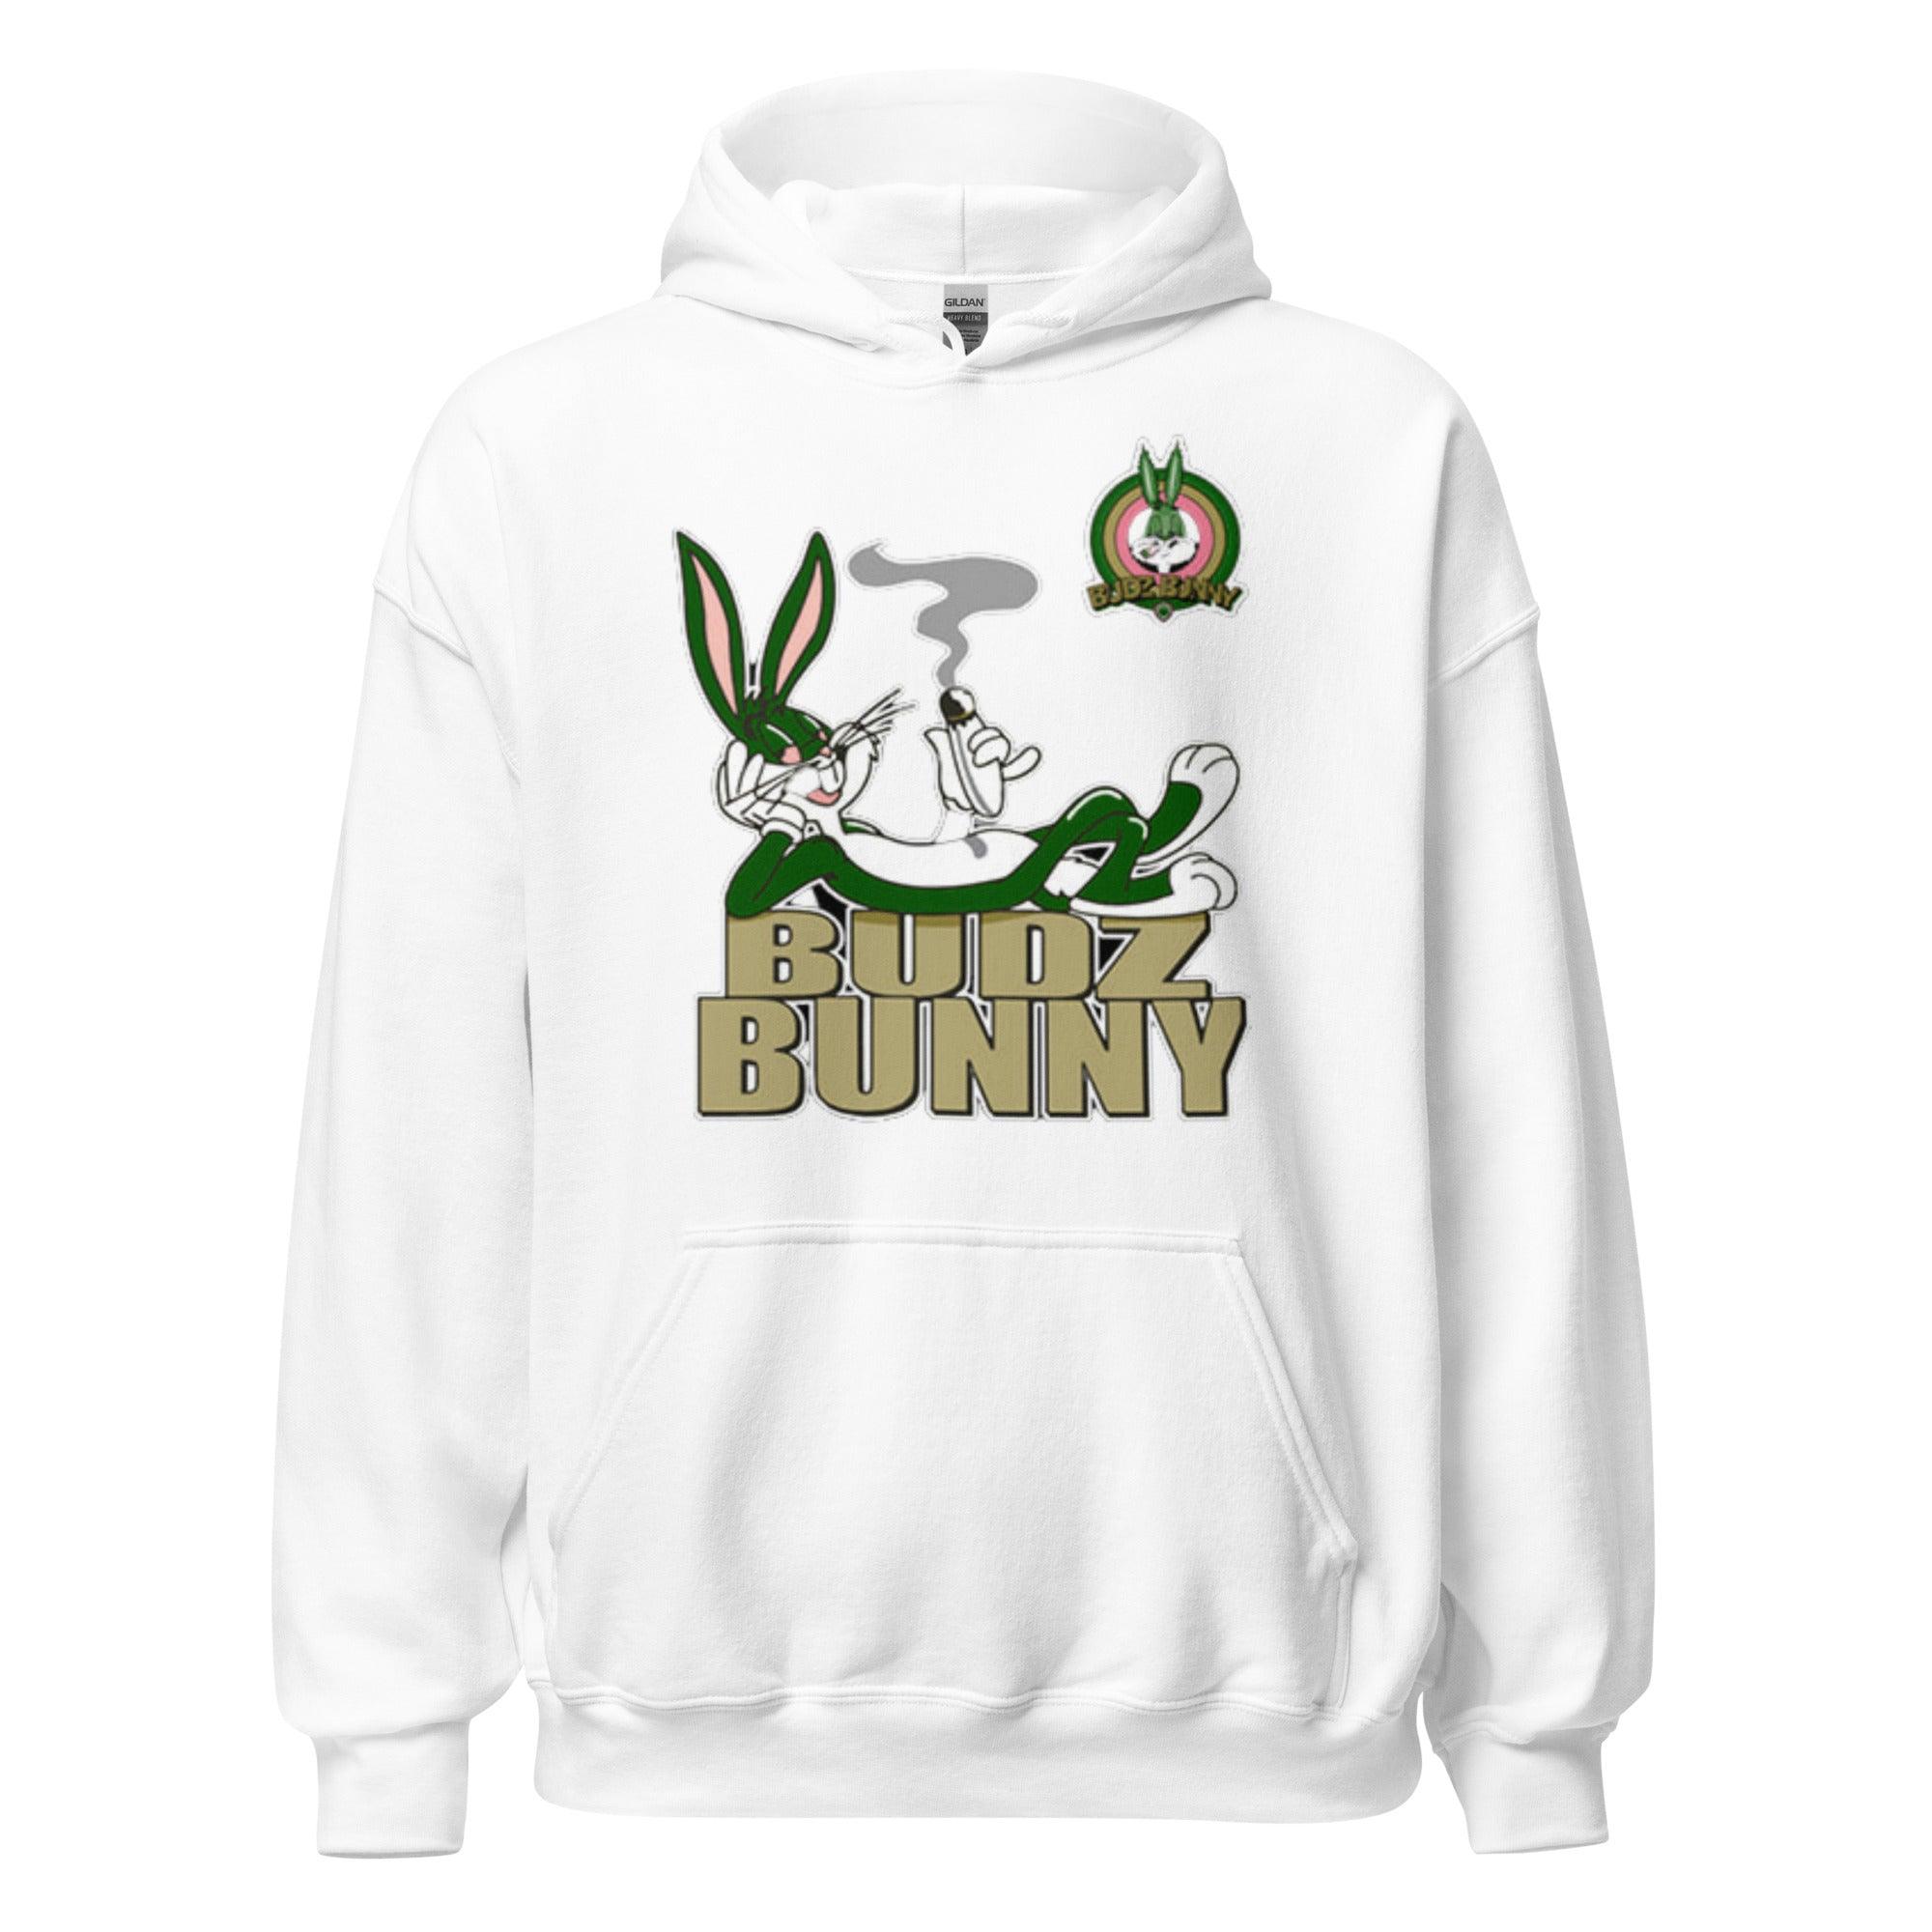 Midweight Blended Hoodie Top Koala Soft Style Budz Bunny Unisex Pullover